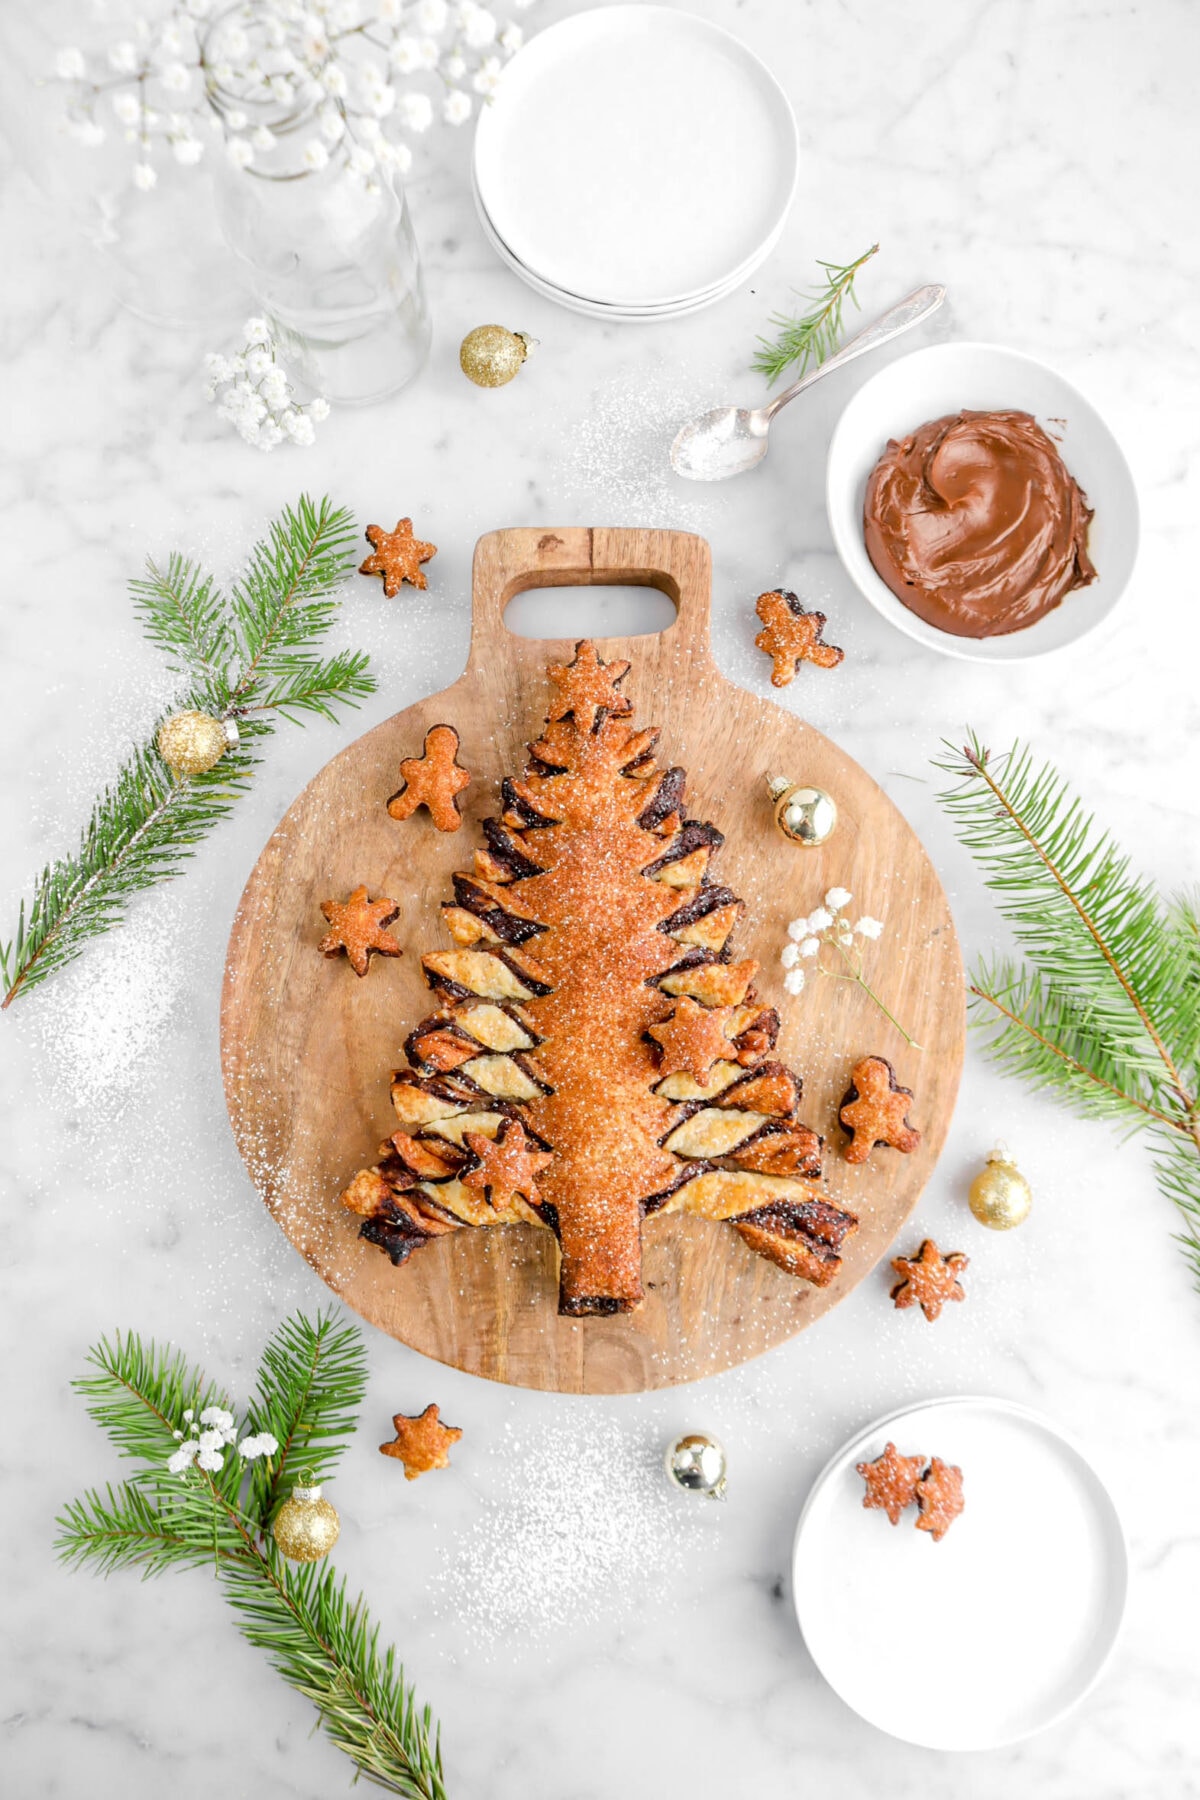 christmas tree tear and share on circle wood board with pine branches, bowl of ganache, gold ornaments, and gingerbread men and snowflake shaped puff pastry bites around.